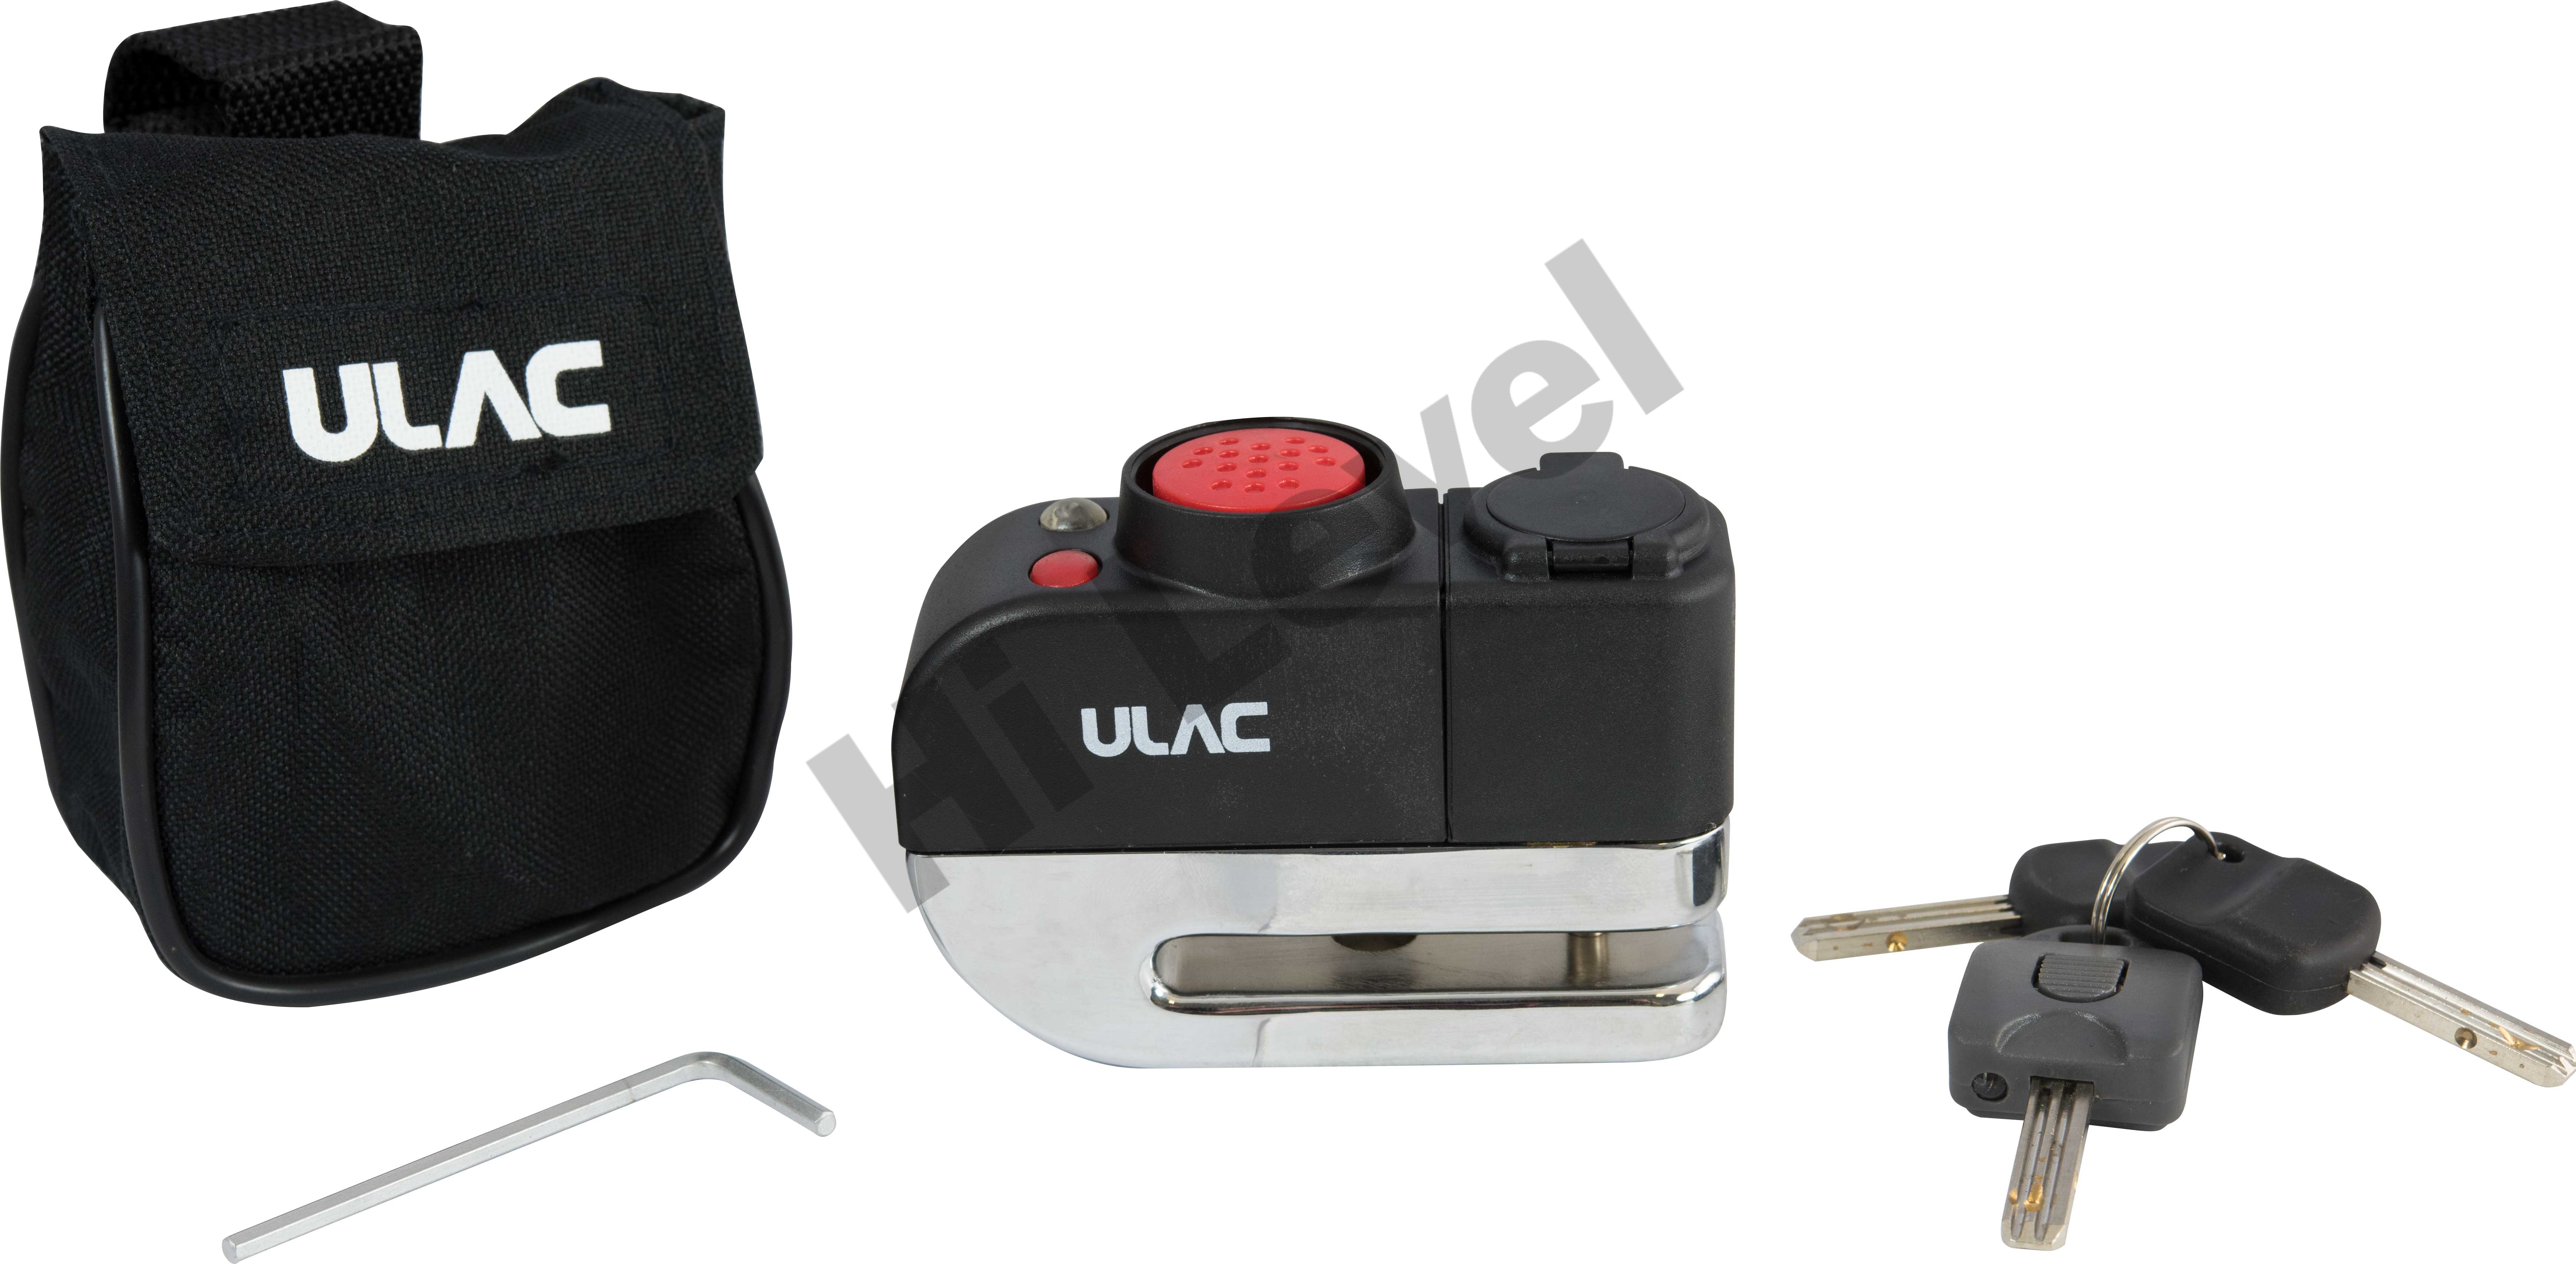 LOCK ULACO DISC WITH 5MM PIN, WITH 3 KEYS AND HOLDER BAG